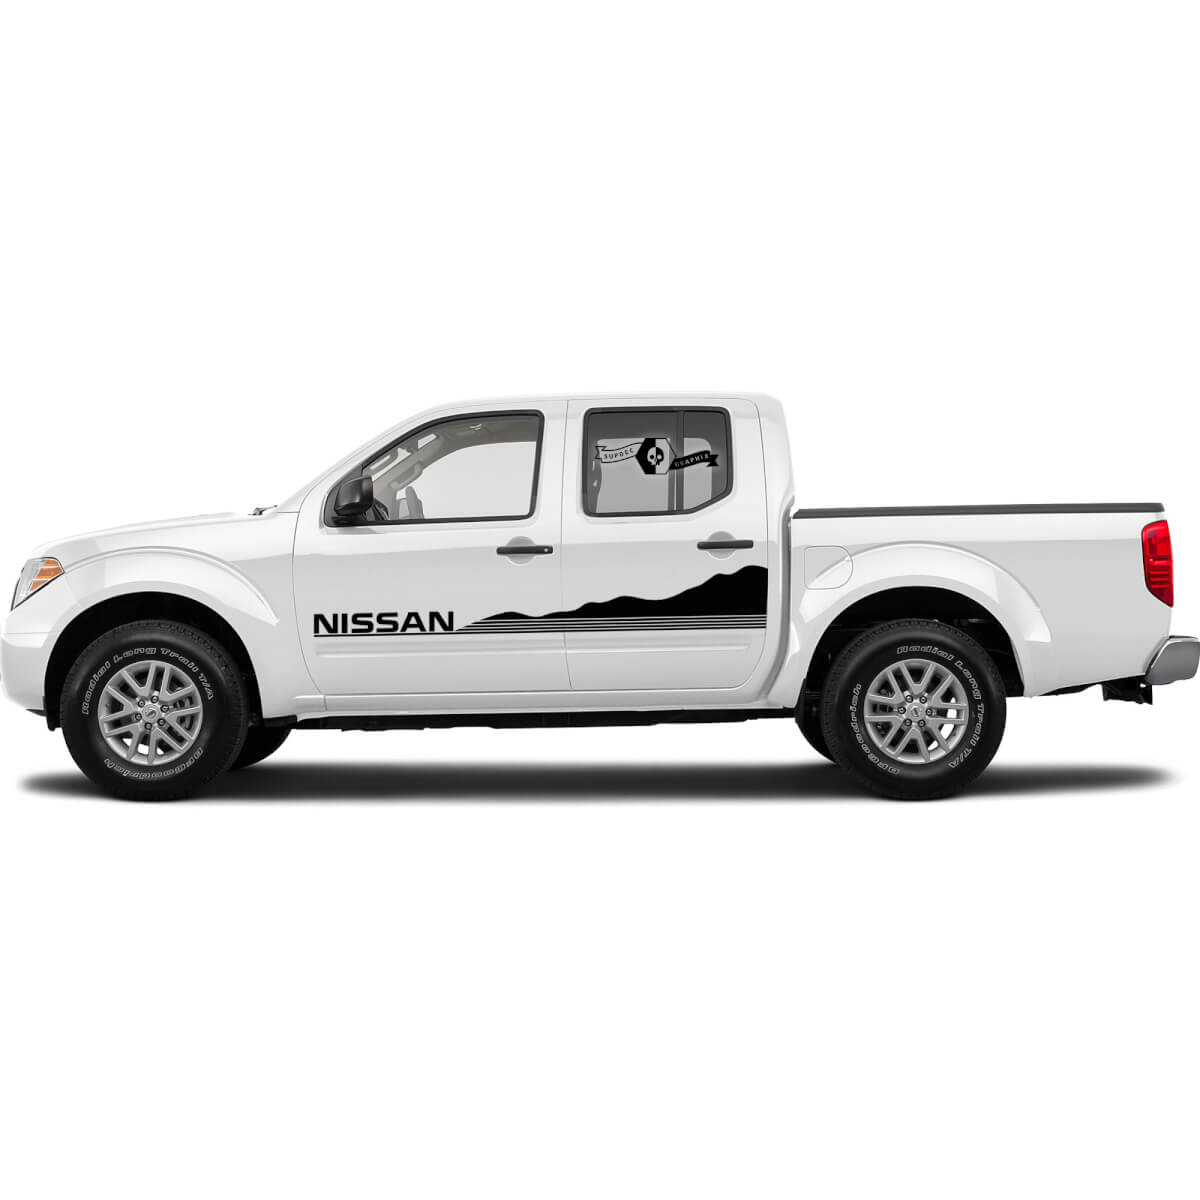 2 Decal Sticker Graphic Side Stripe Doors Hills Mountains For Nissan Frontier Navara D40 D22 